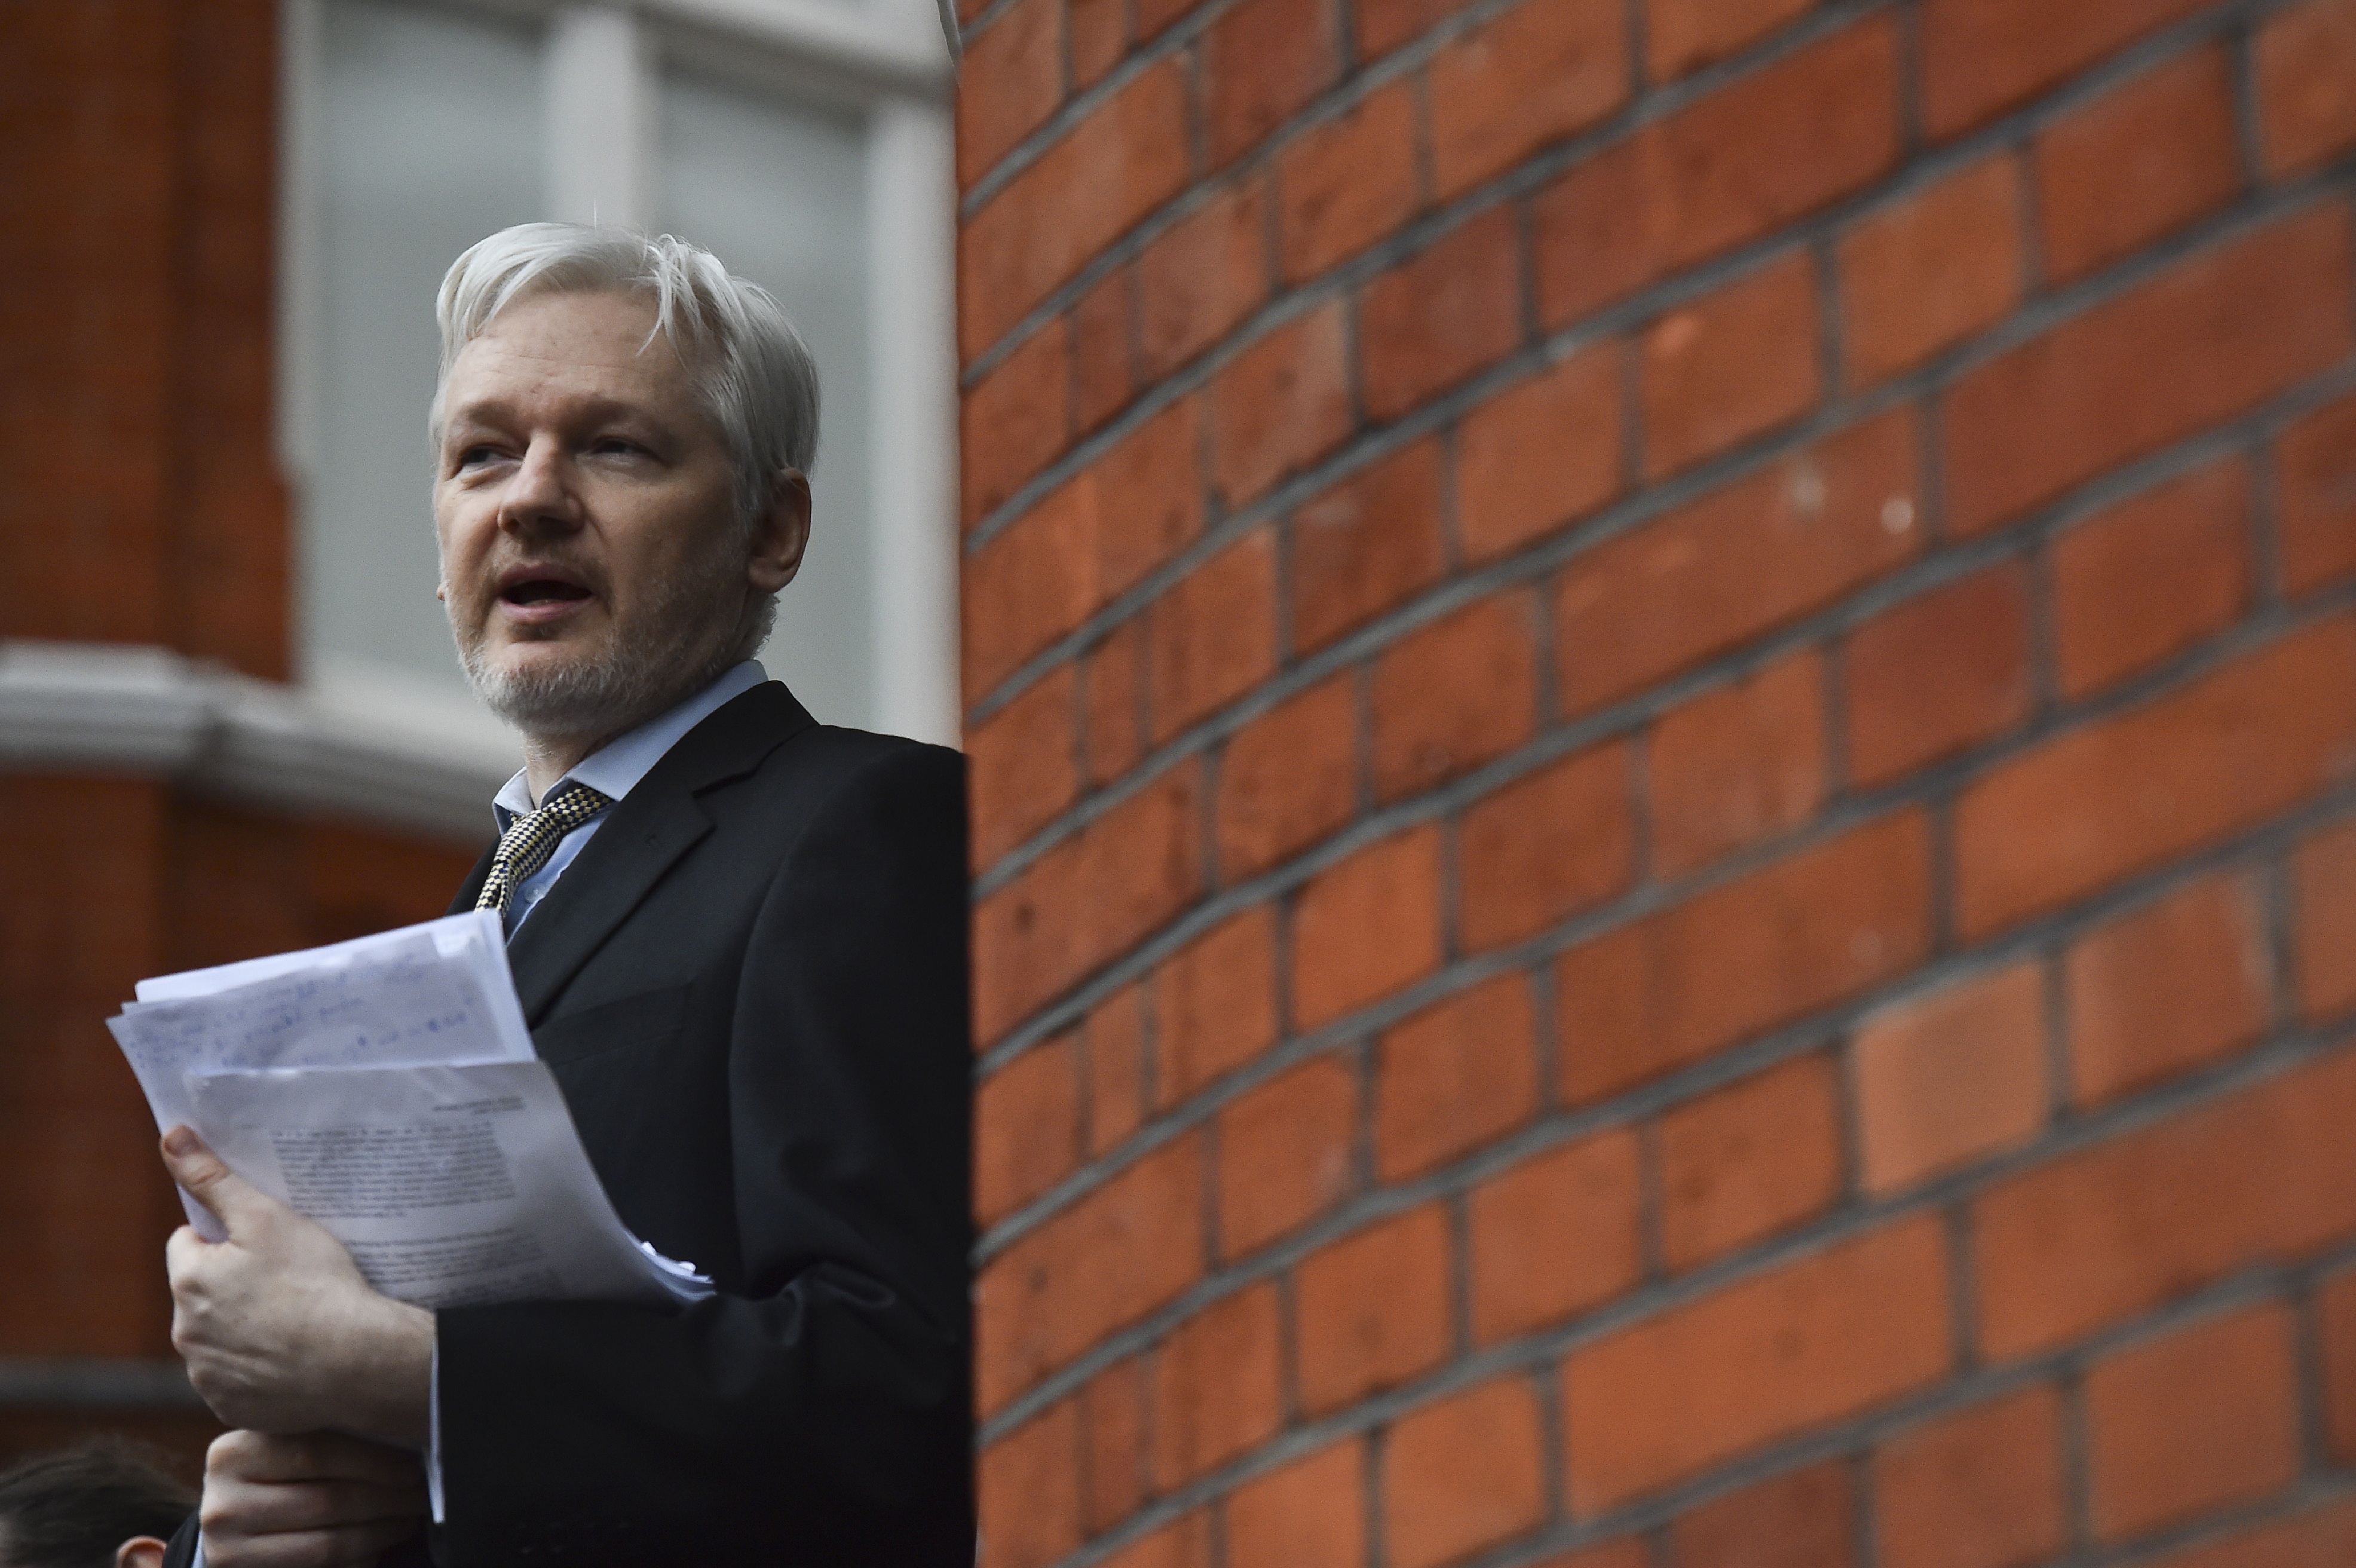 (FILES): This file picture taken on February 5, 2016 shows WikiLeaks founder Julian Assange addressing the media and holding a printed report of the judgement of the UN's Working Group on Arbitrary Detention on his case from the balcony of the Ecuadorian Embassy in central London. Accusations that Russia interfered with the US presidential election by leaking hacked documents via WikiLeaks have put a fresh spotlight on the crusading website's founder Julian Assange. / AFP PHOTO / BEN STANSALL